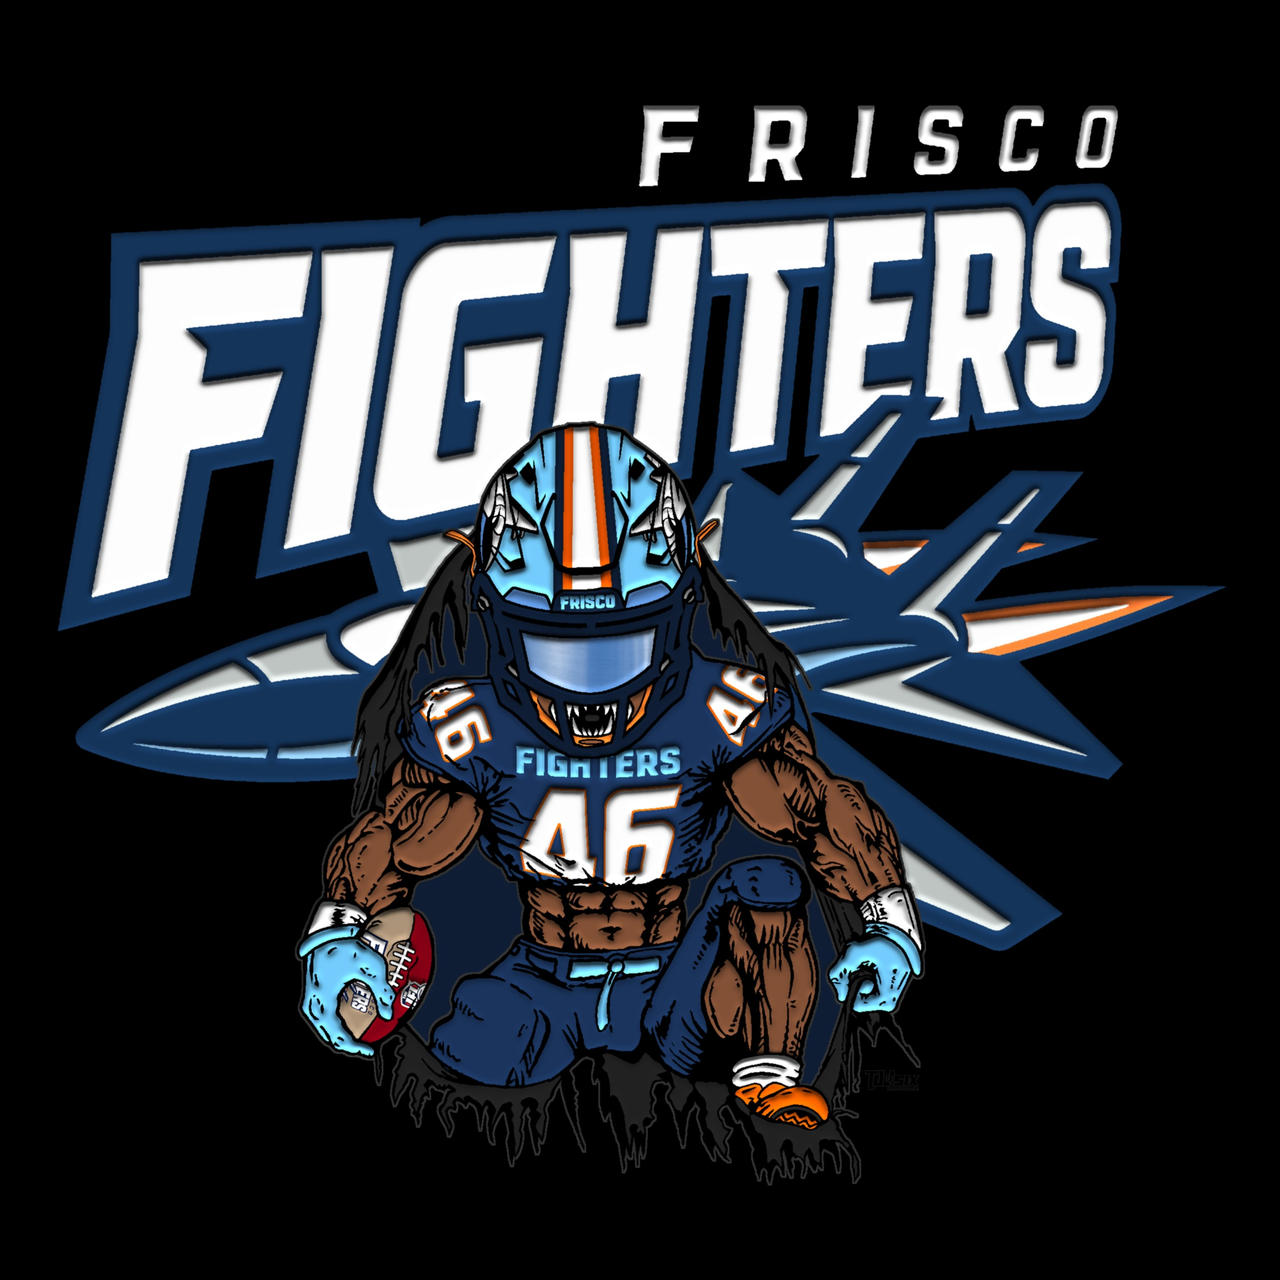 Team History - Frisco Fighters